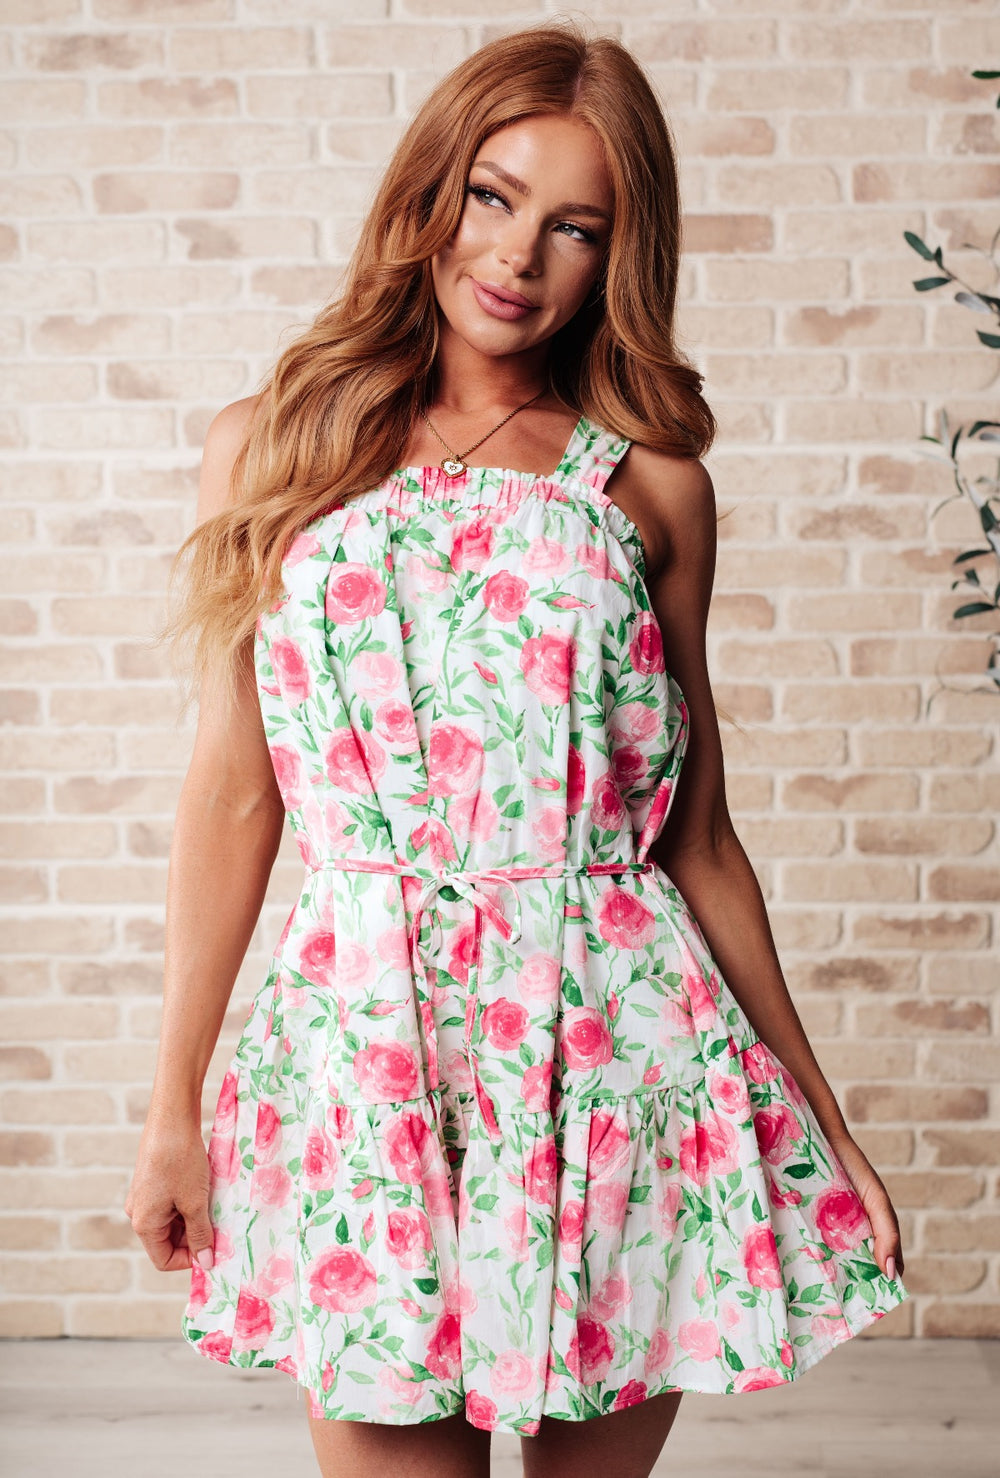 Pink and Green Floral Dress - Inspired Eye Boutique